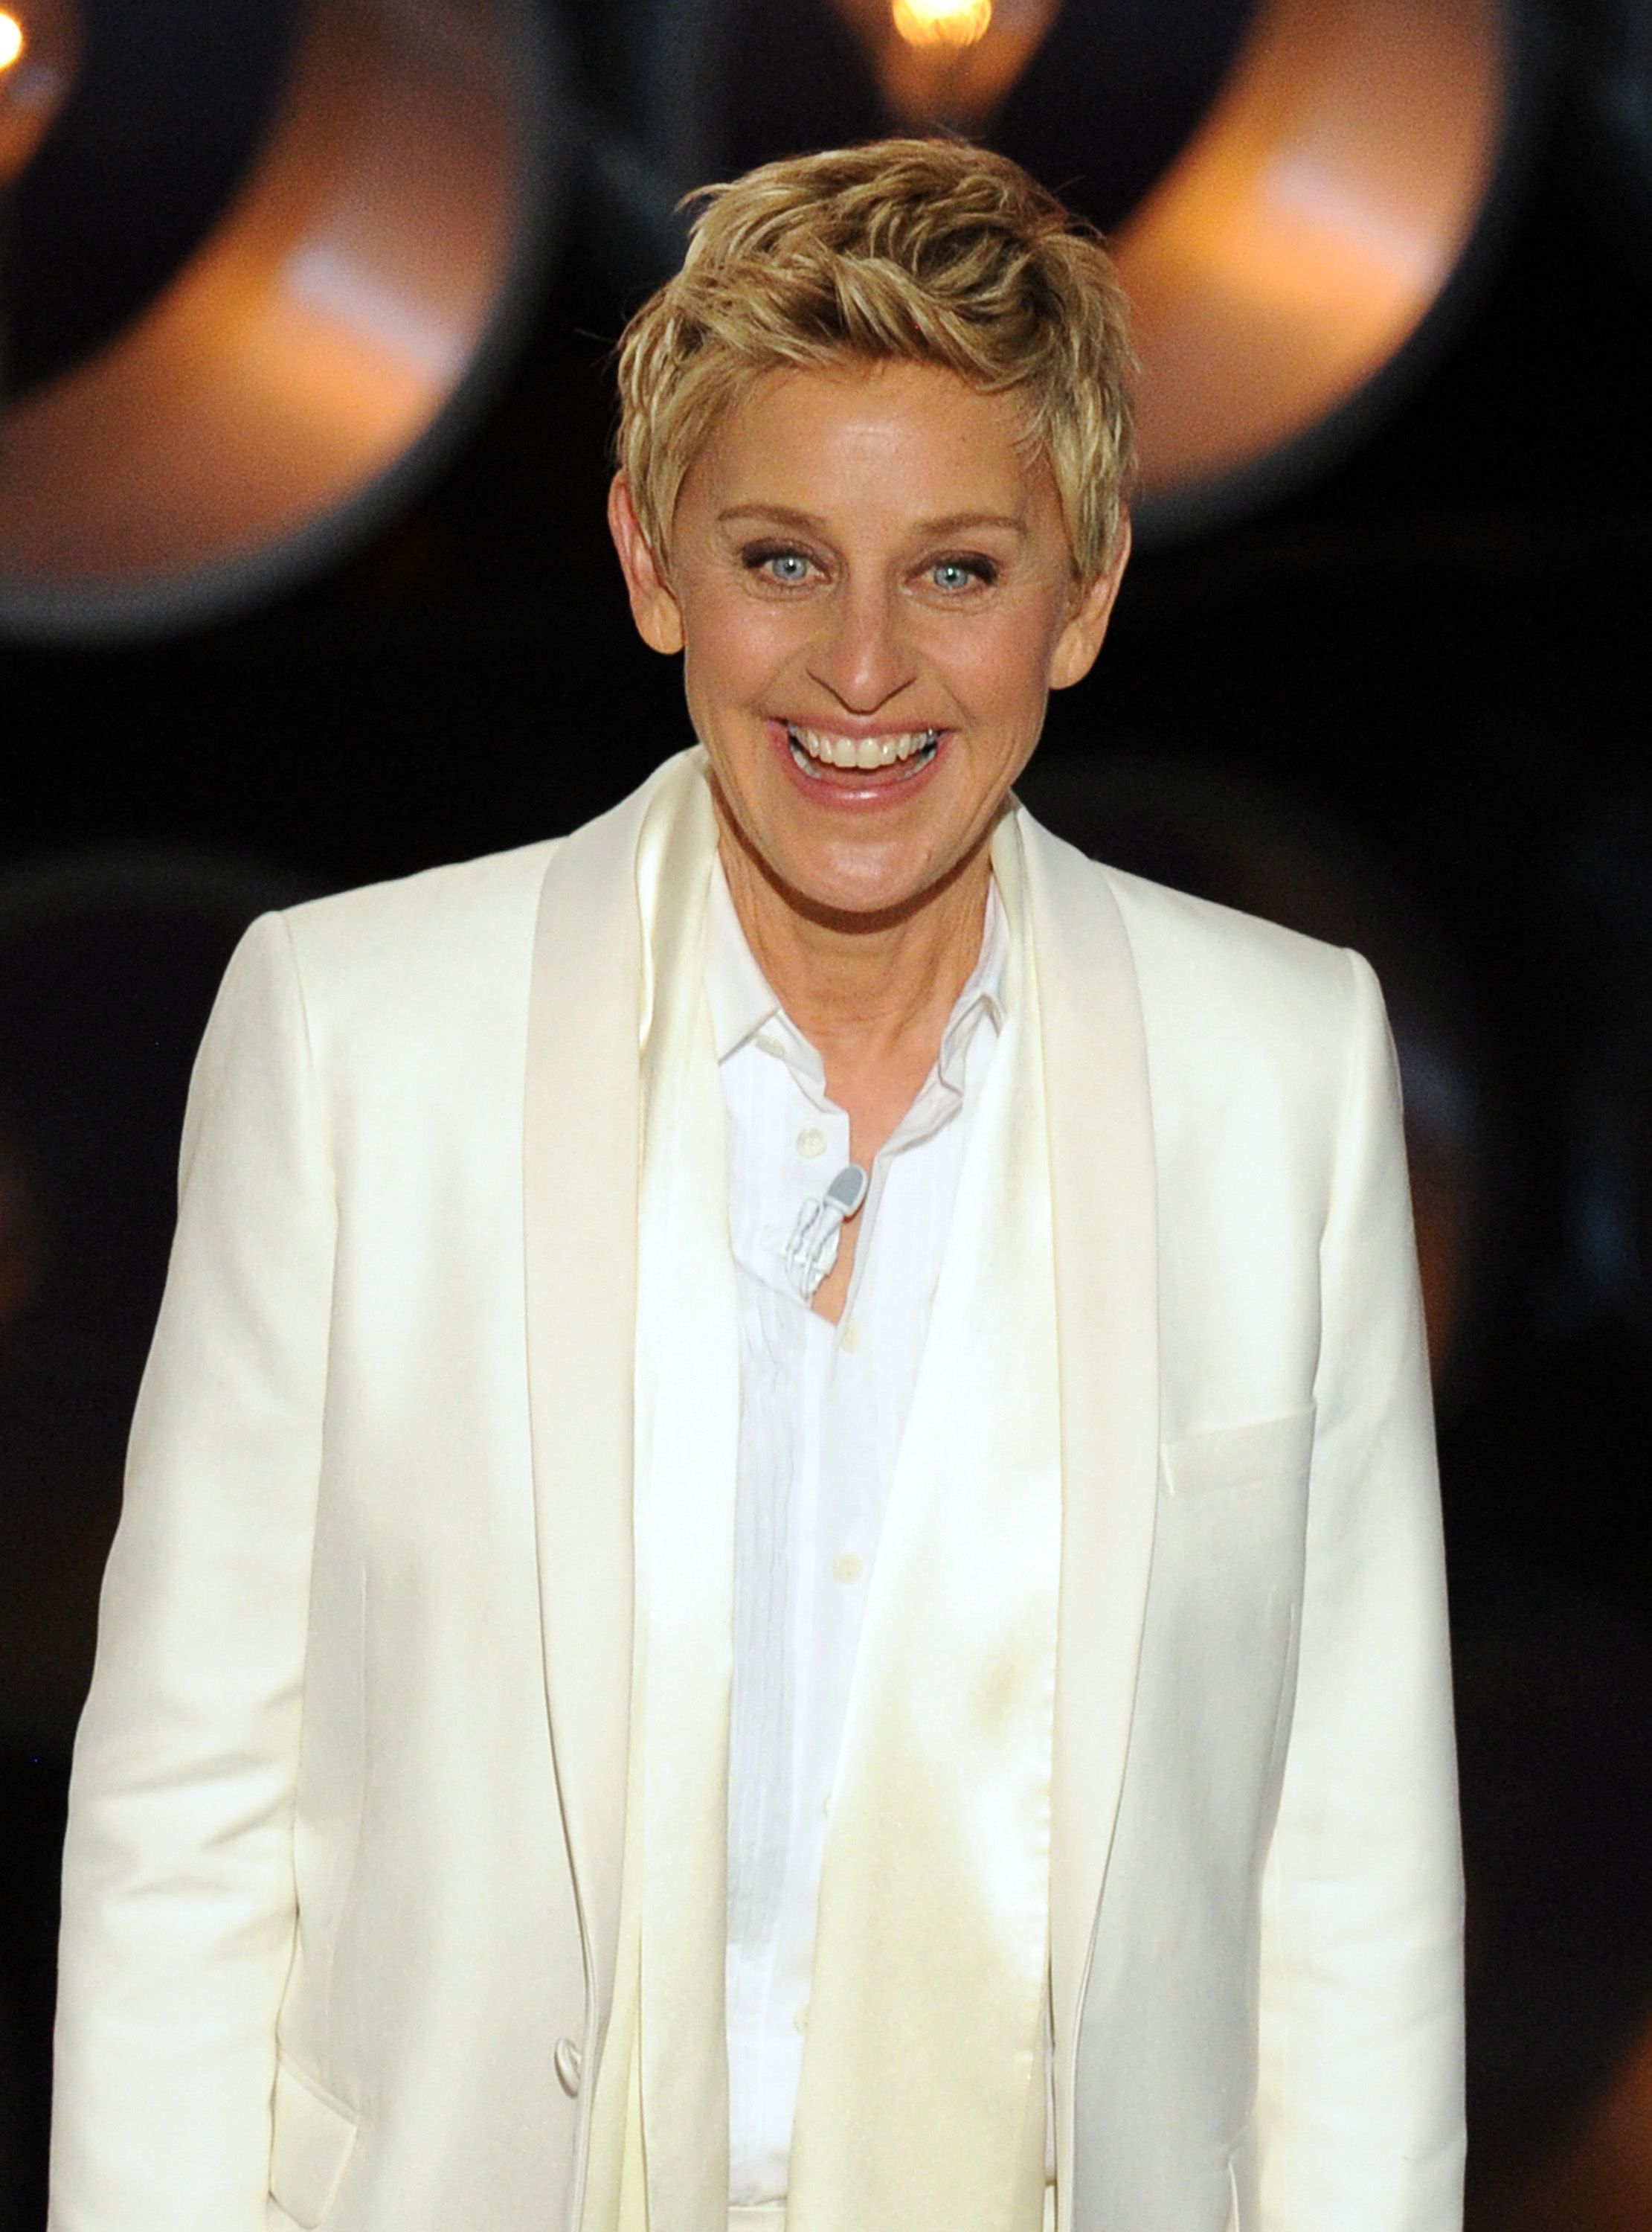 Ellen DeGeneres at the Oscars at the Dolby Theatre on March 2, 2014 | Photo: Getty Images